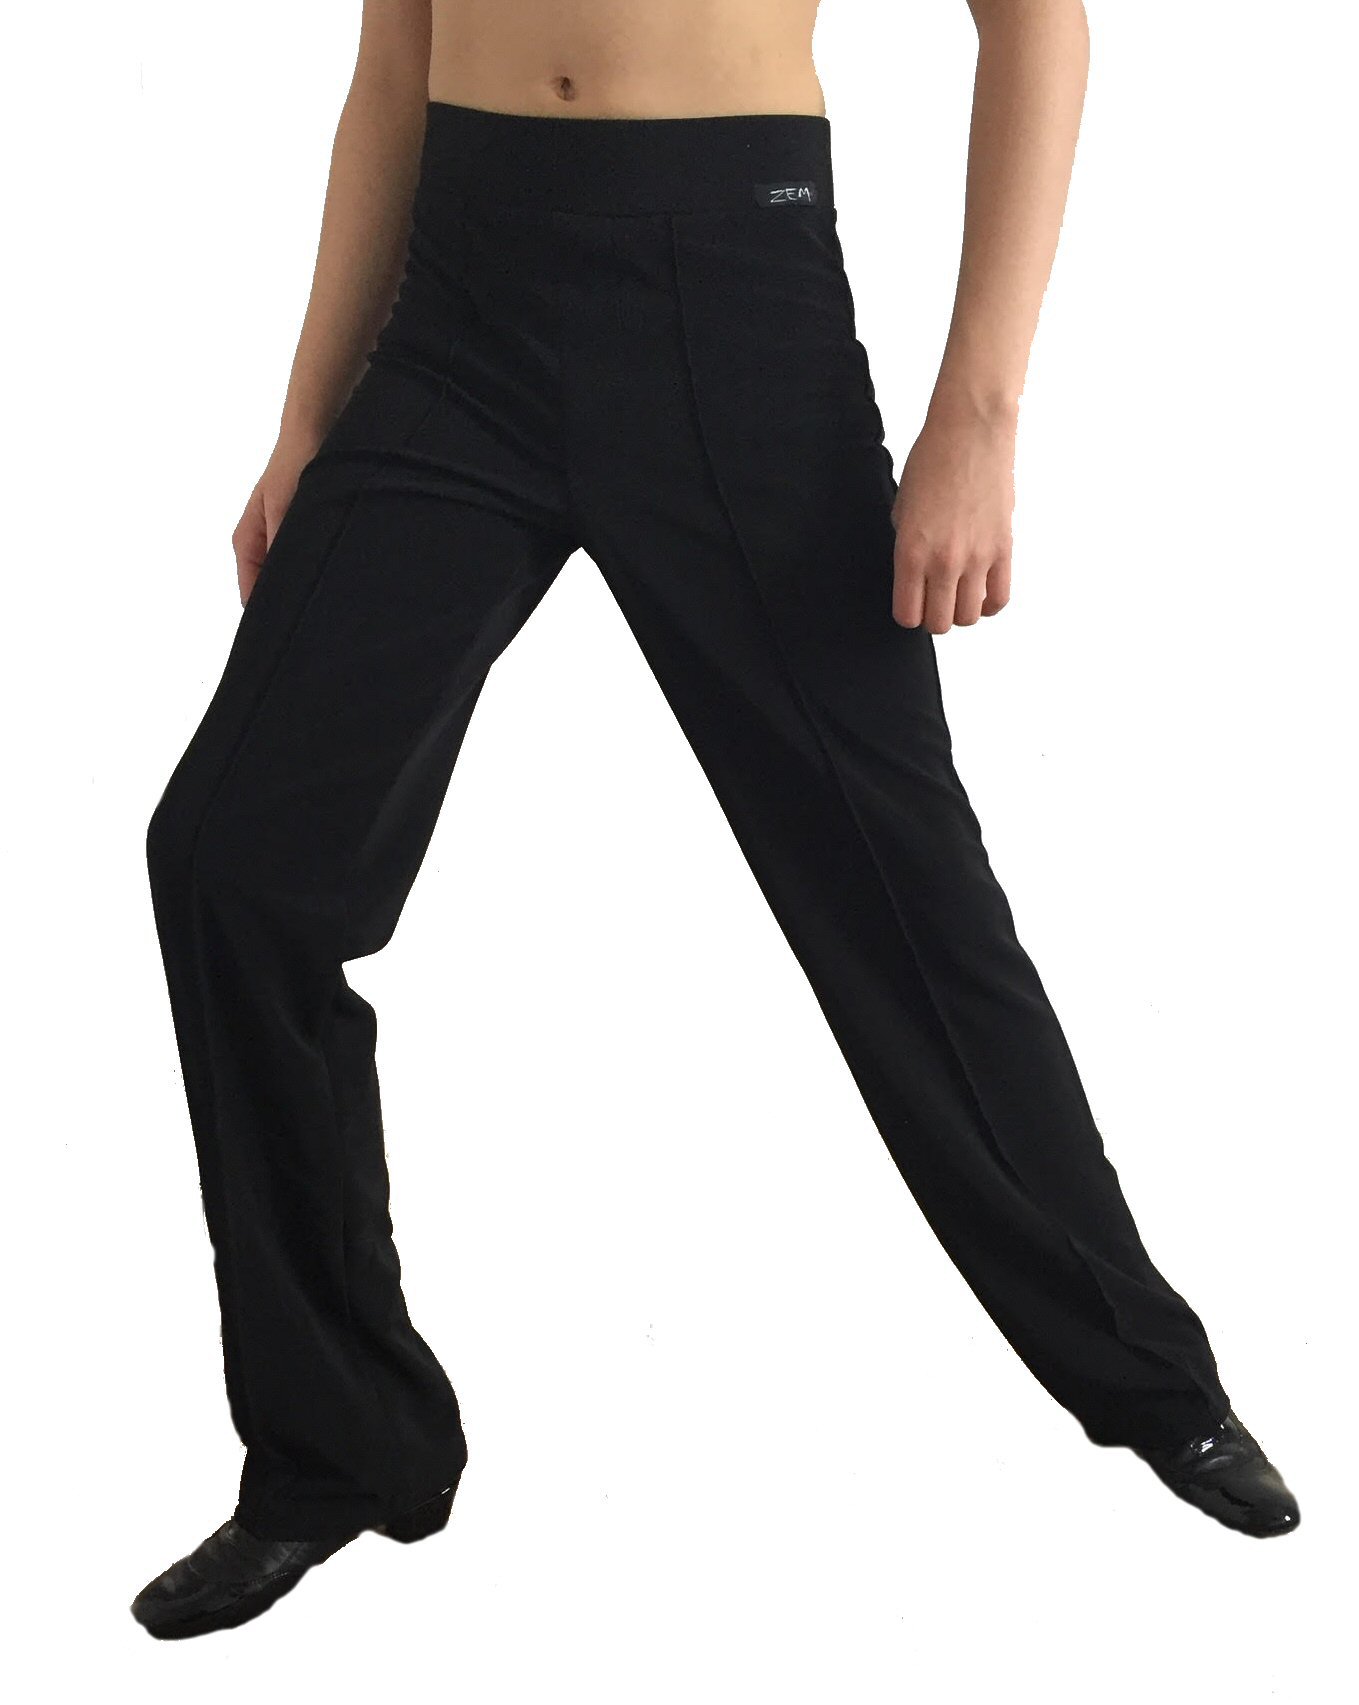 Boys Stretchy dance trousers